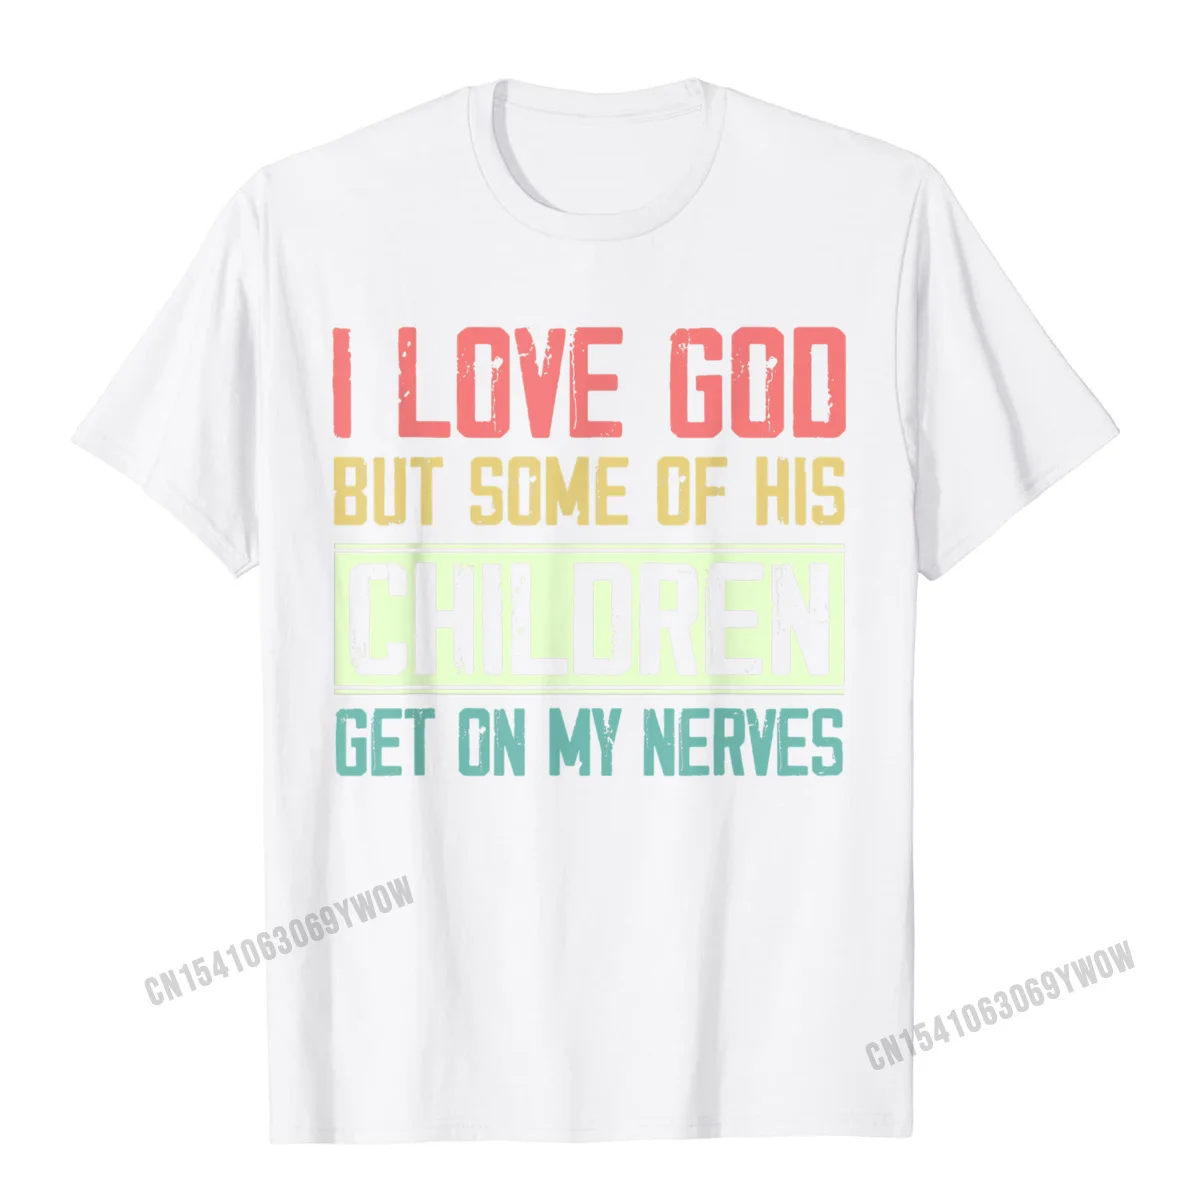 Fashionable Top T-shirts for Boys Casual Lovers Day Tops & Tees Short Sleeve Funny Casual Top T-shirts Crew Neck 100% Cotton I Love God But Some Of His Children Get On My Nerves Funny T-Shirt__414 white